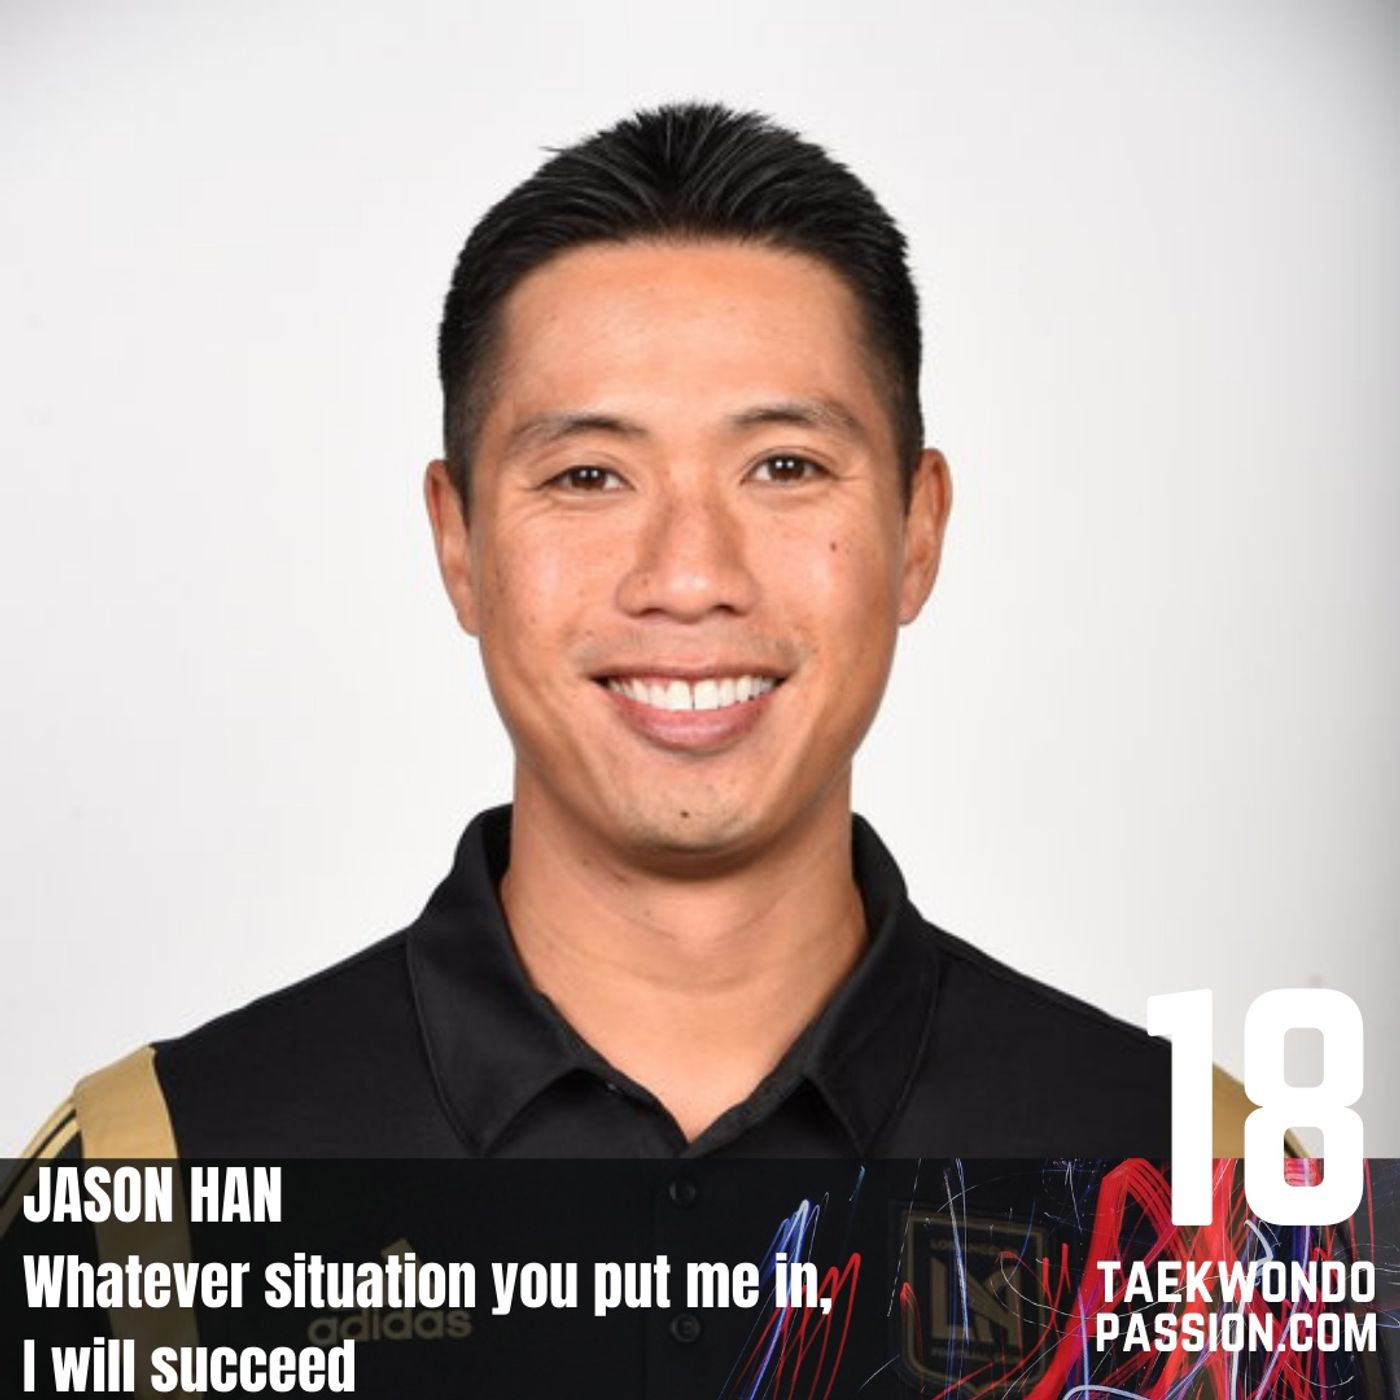 Jason Han: Whatever situation you put me in, I will succeed